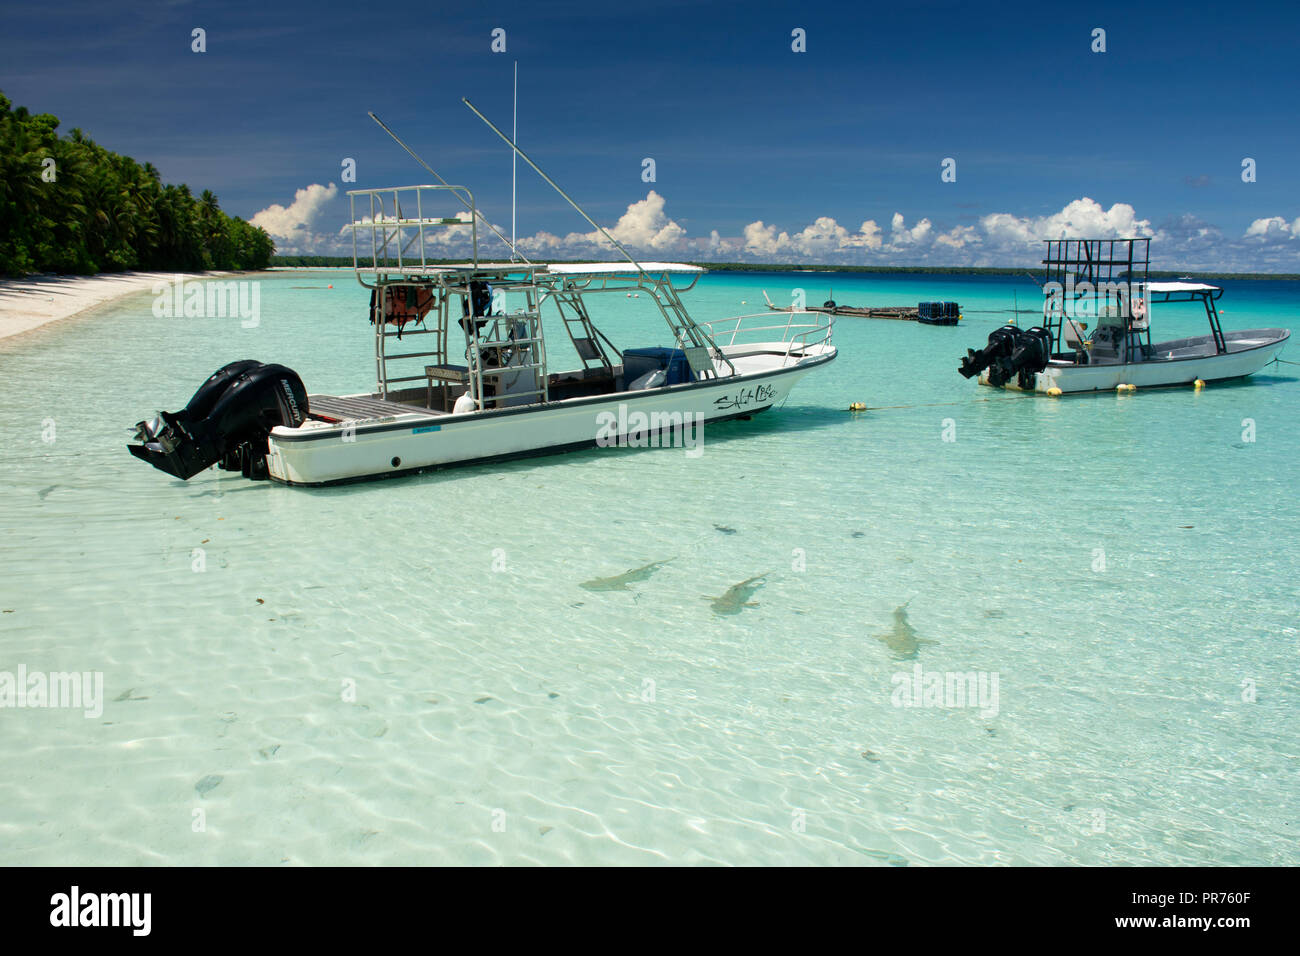 Three blacktip reef sharks, Carcharhinus melanopterus,  swim in the shallows close to moored boats, Ant Atoll, Pohnpei, Federated States of Micronesia Stock Photo